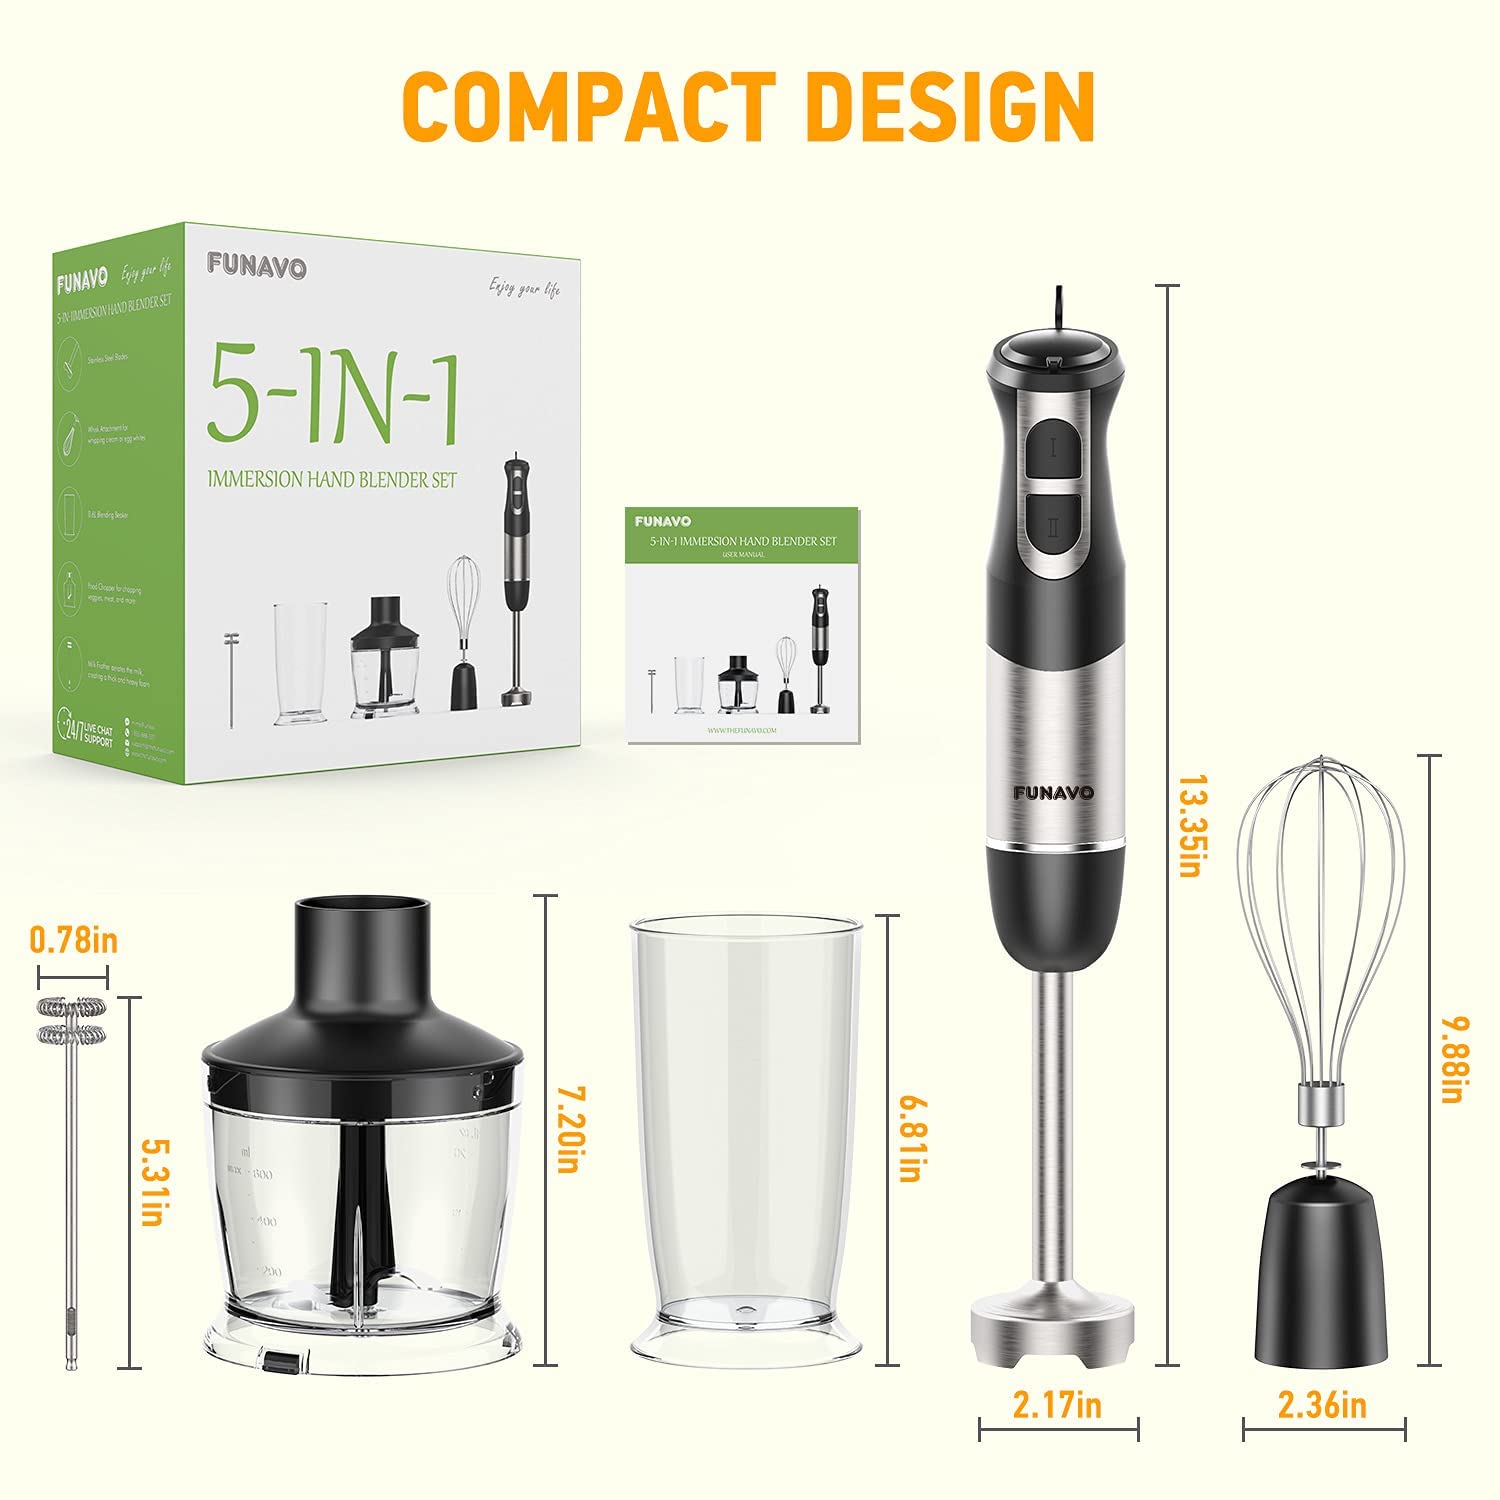 Dropship FUNAVO Immersion Hand Blender, 5-in-1 Multi-Function 12 Speed 800W  Stainless Steel Handheld Stick Blender With Turbo Mode, 600ml Beaker, 500ml  Chopping Bowl, Whisk, Frother Attachments, BPA-Free to Sell Online at a